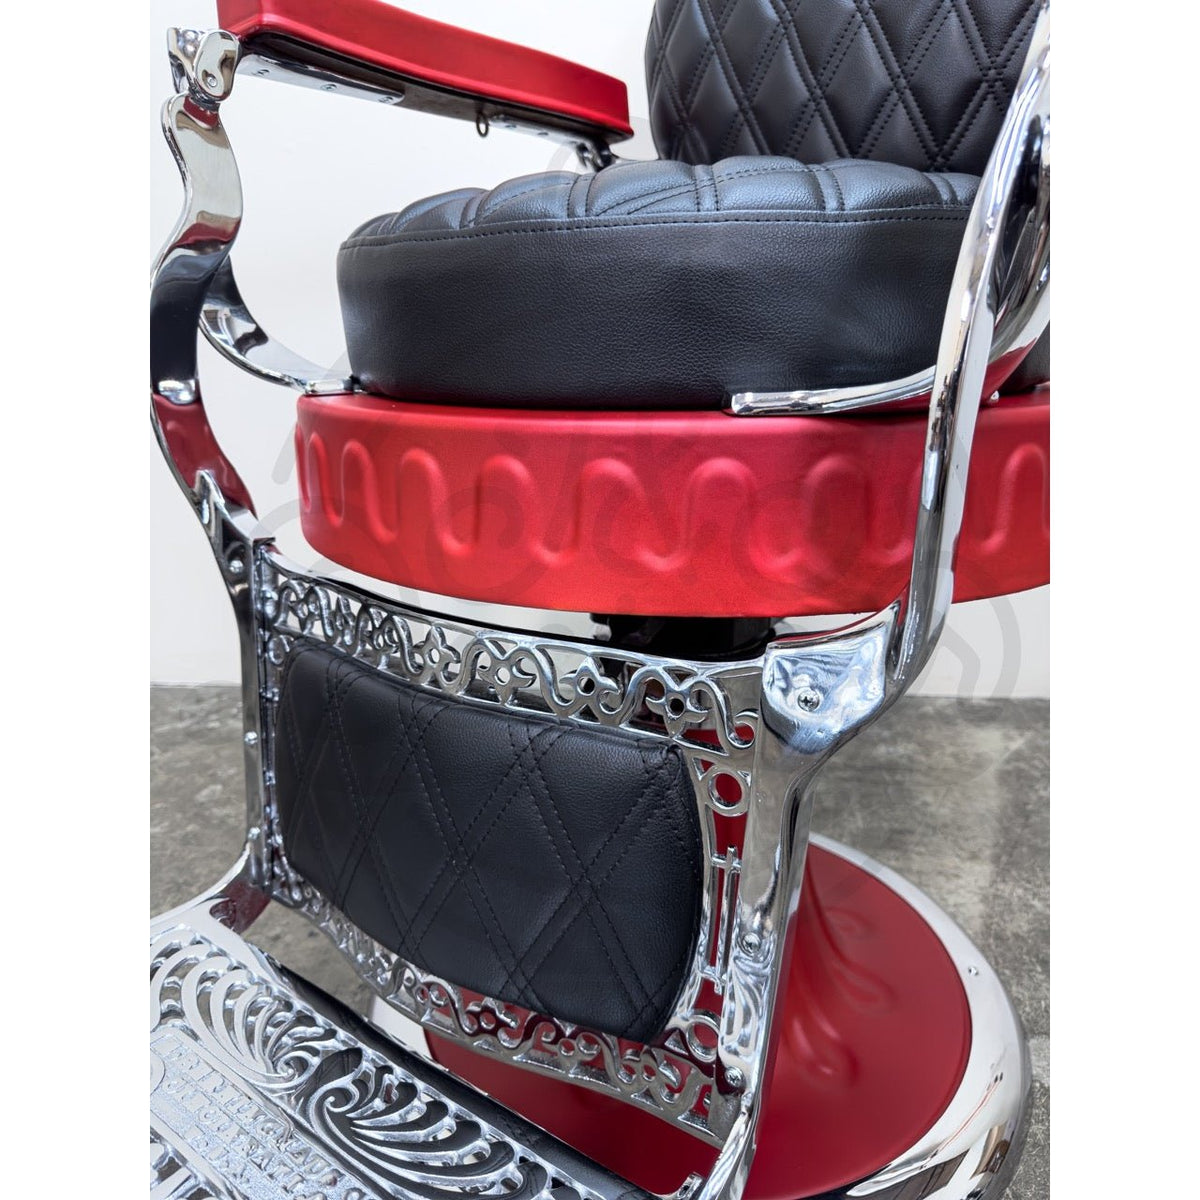 Vintage Round Seat Round Back Hercules - Chrome on Matte Illusion Red